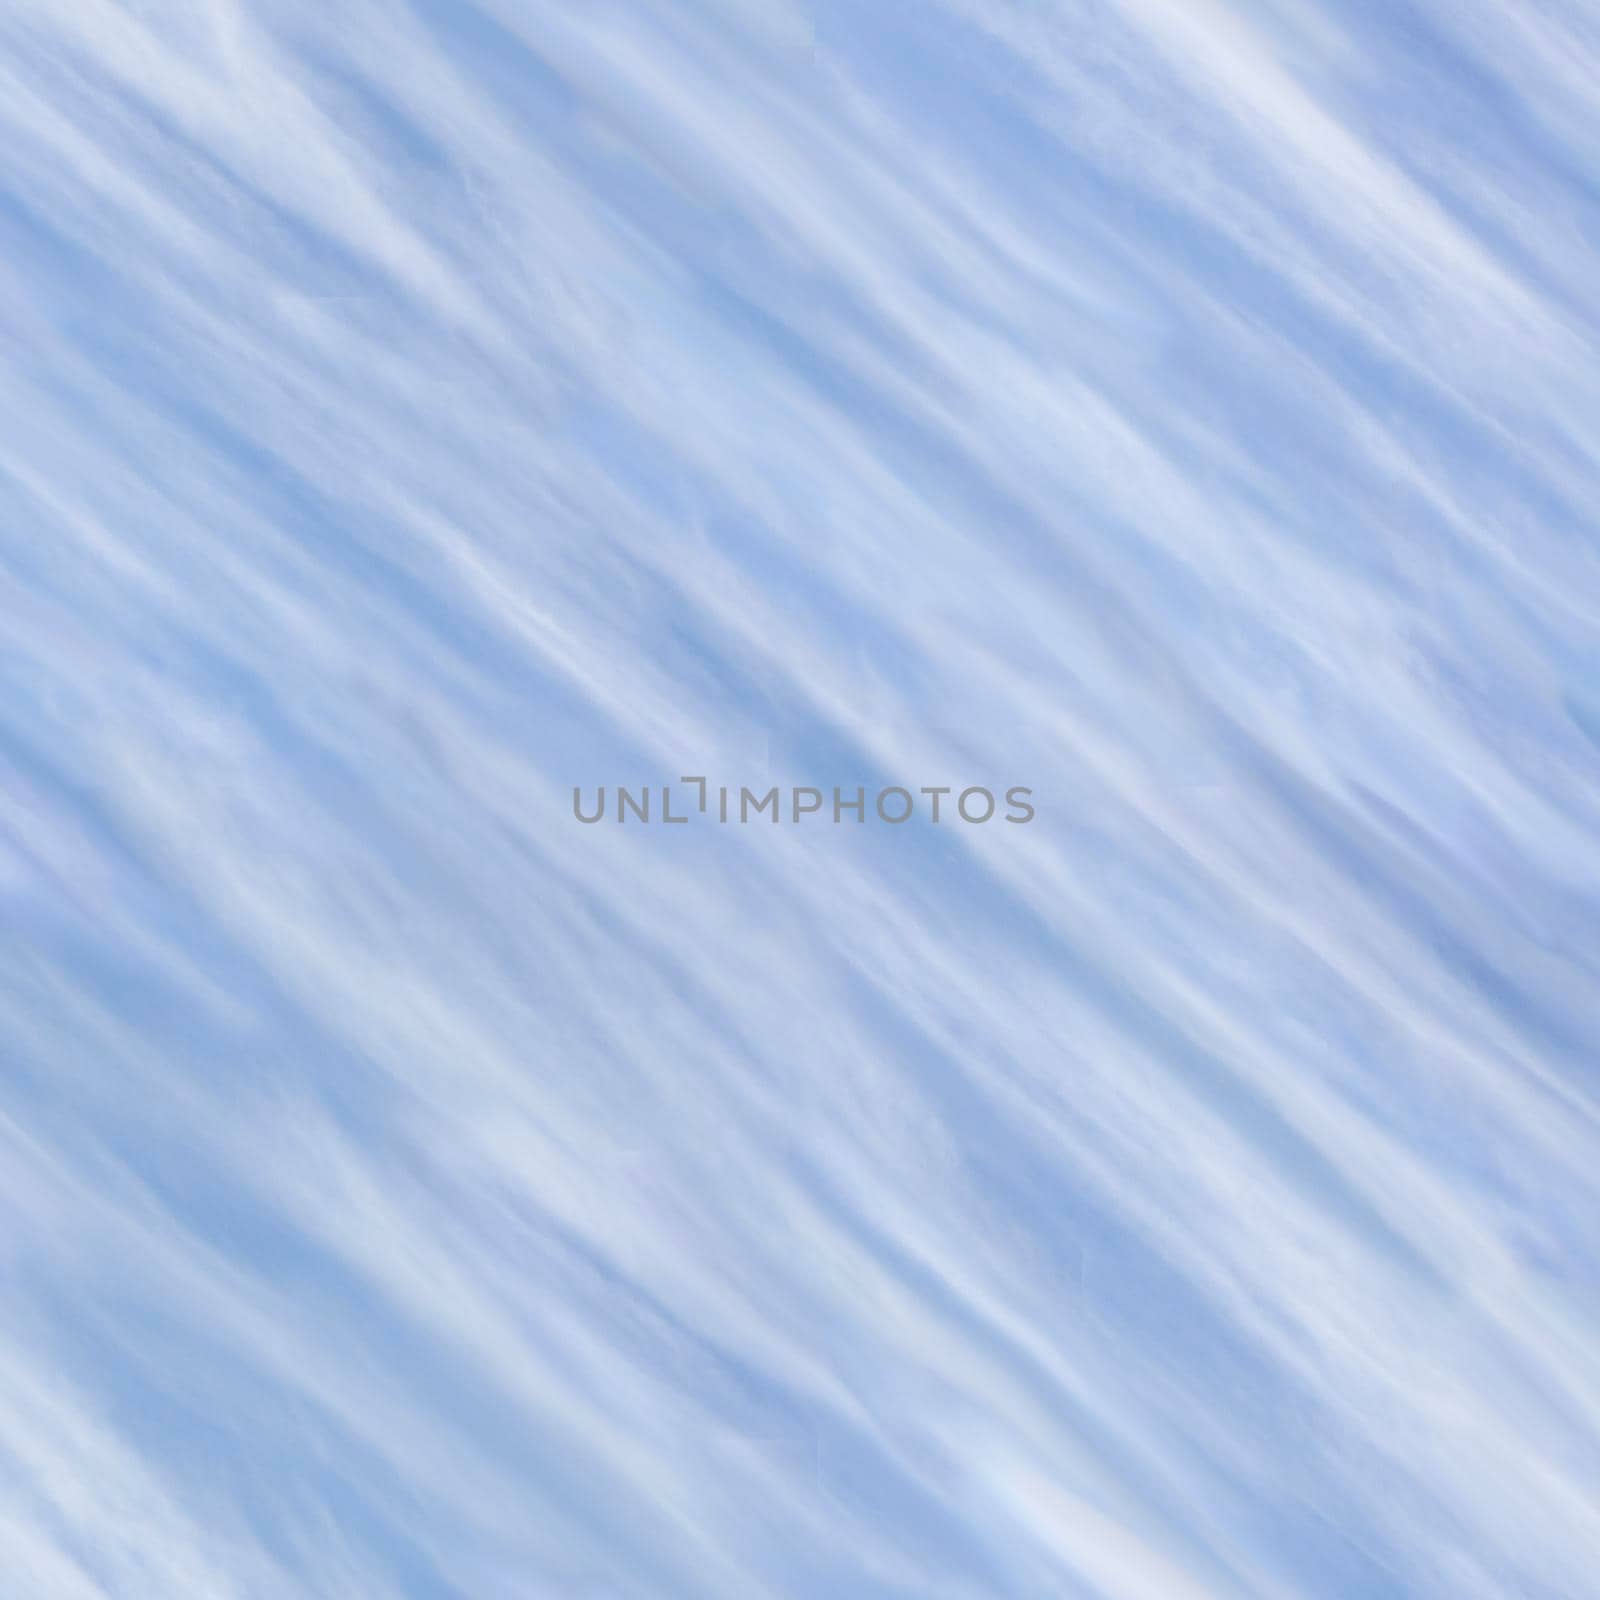 Seamless texture of white cirrus clouds in the form of diagonal stripes on the background blue sky.